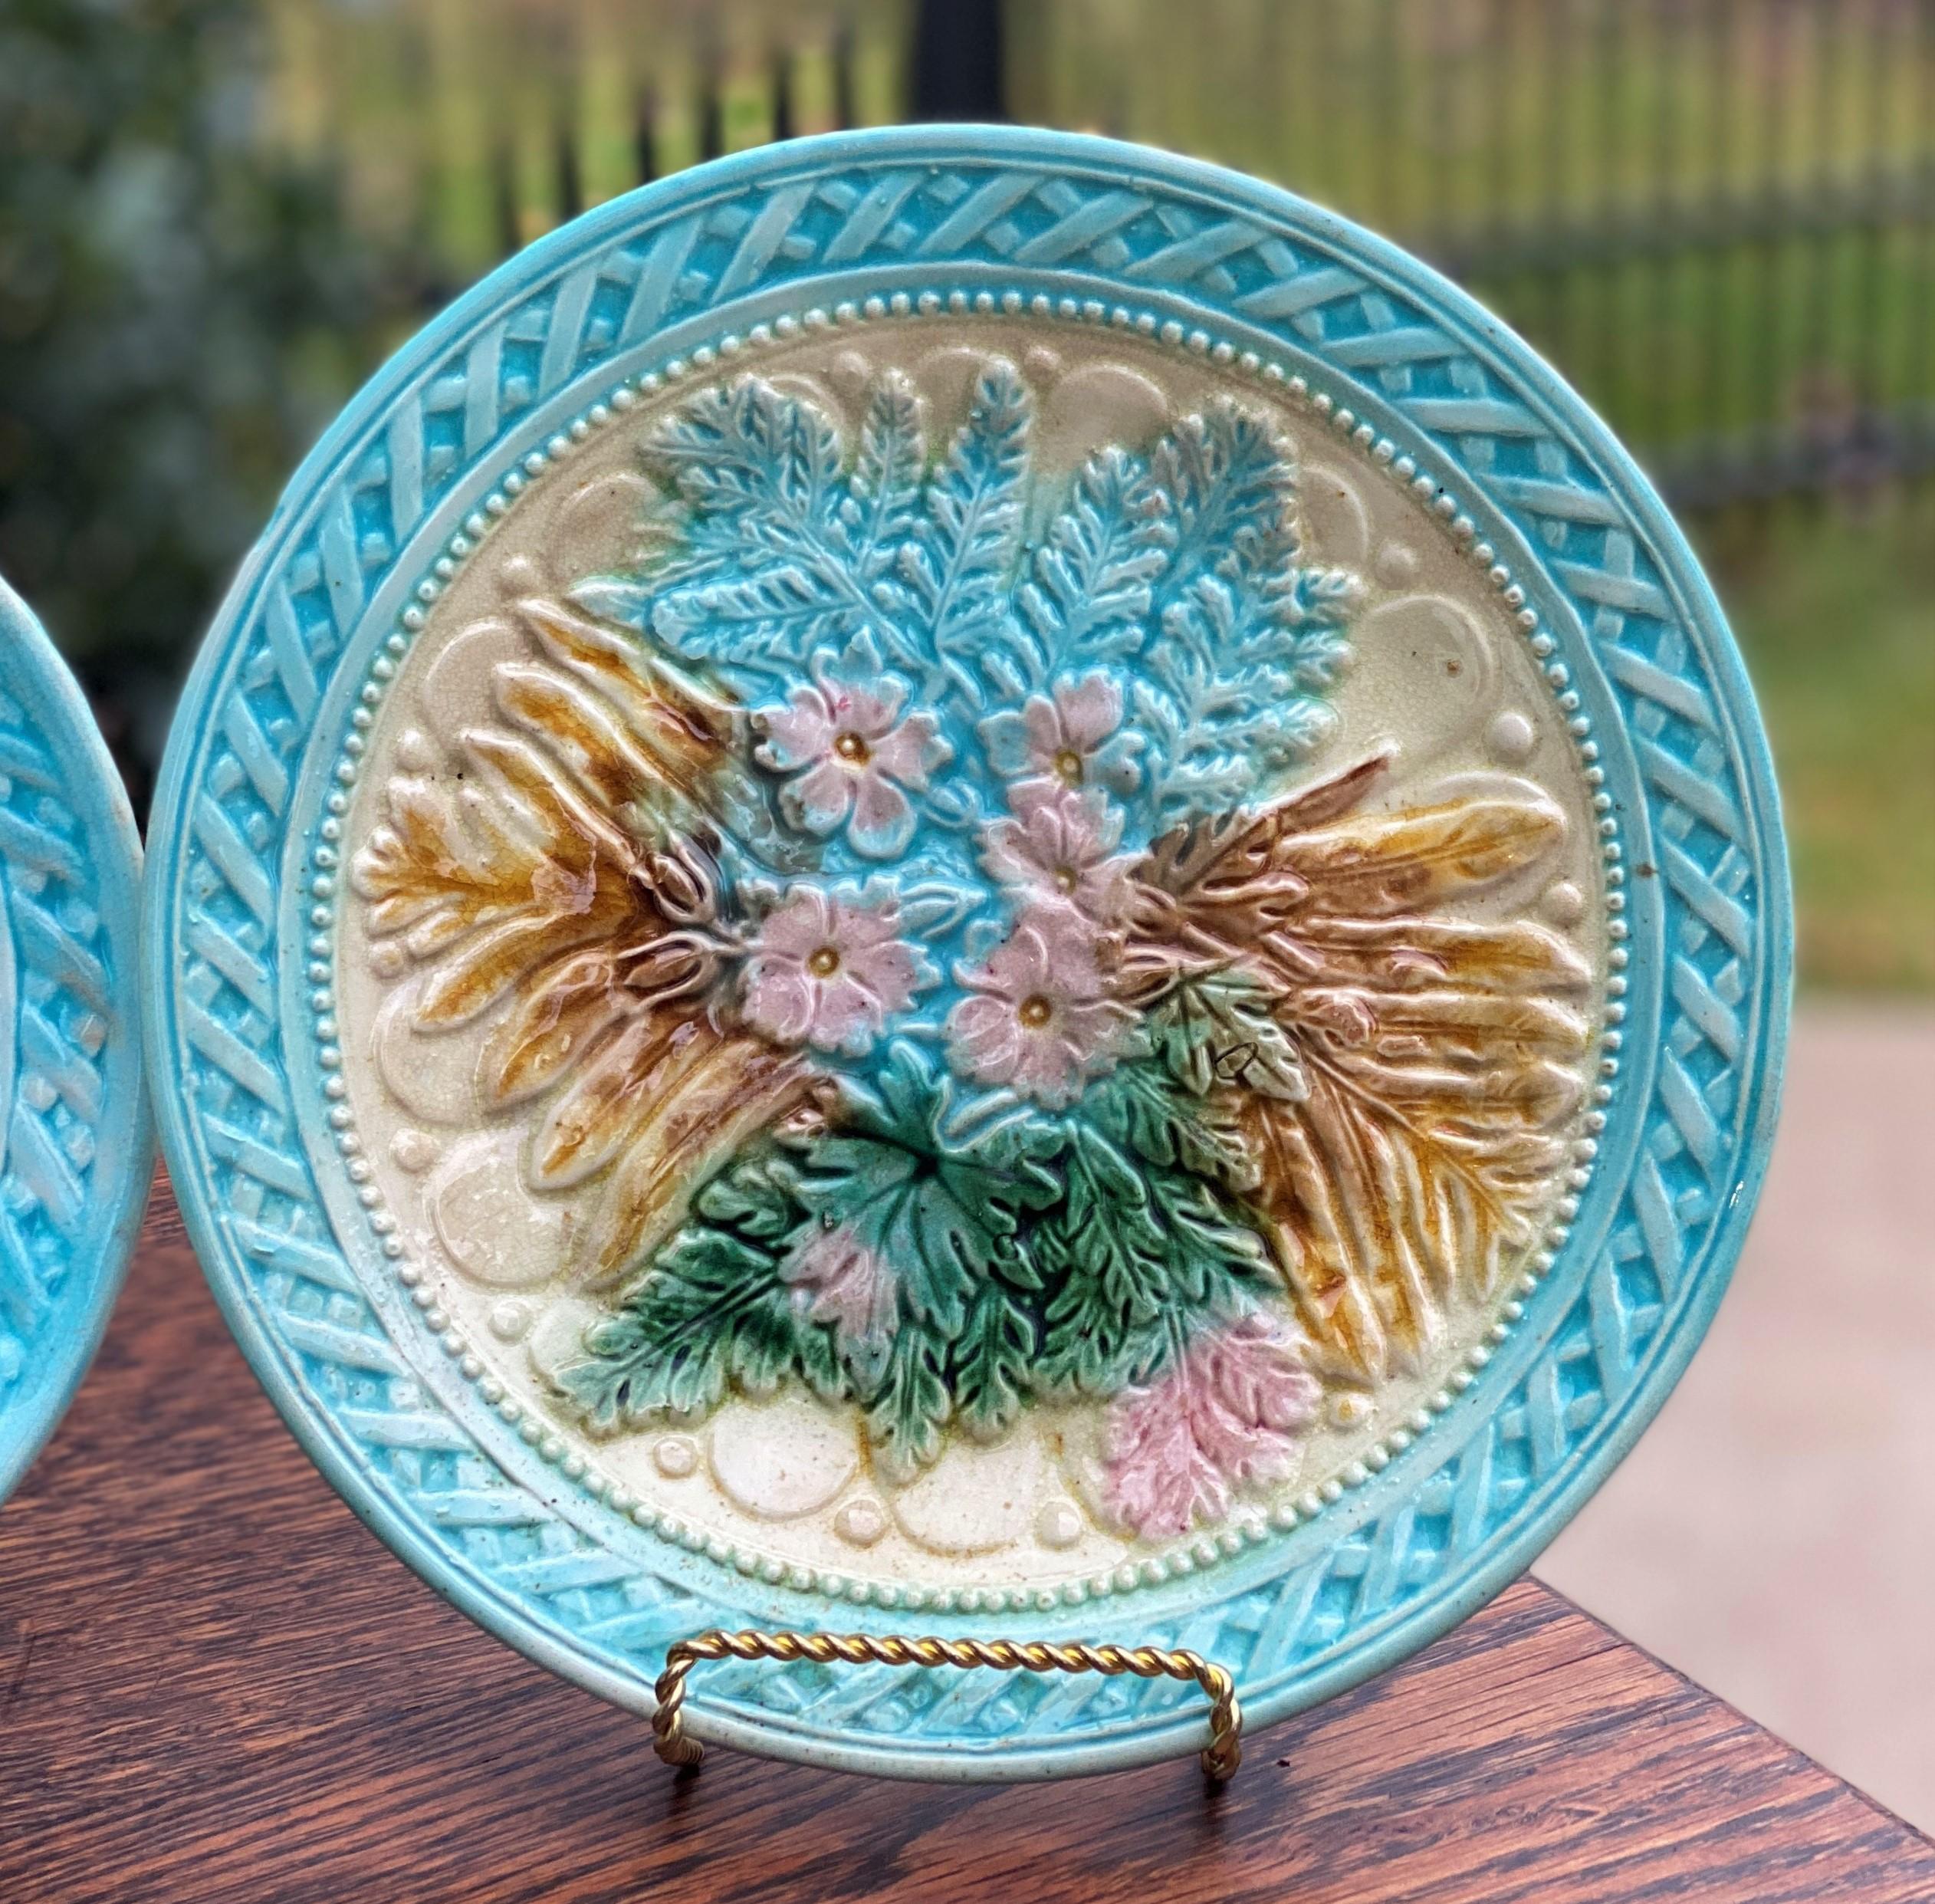 Fired Antique French Majolica Set of 3 Plates Platter Floral Pastel Green Pink Blue For Sale